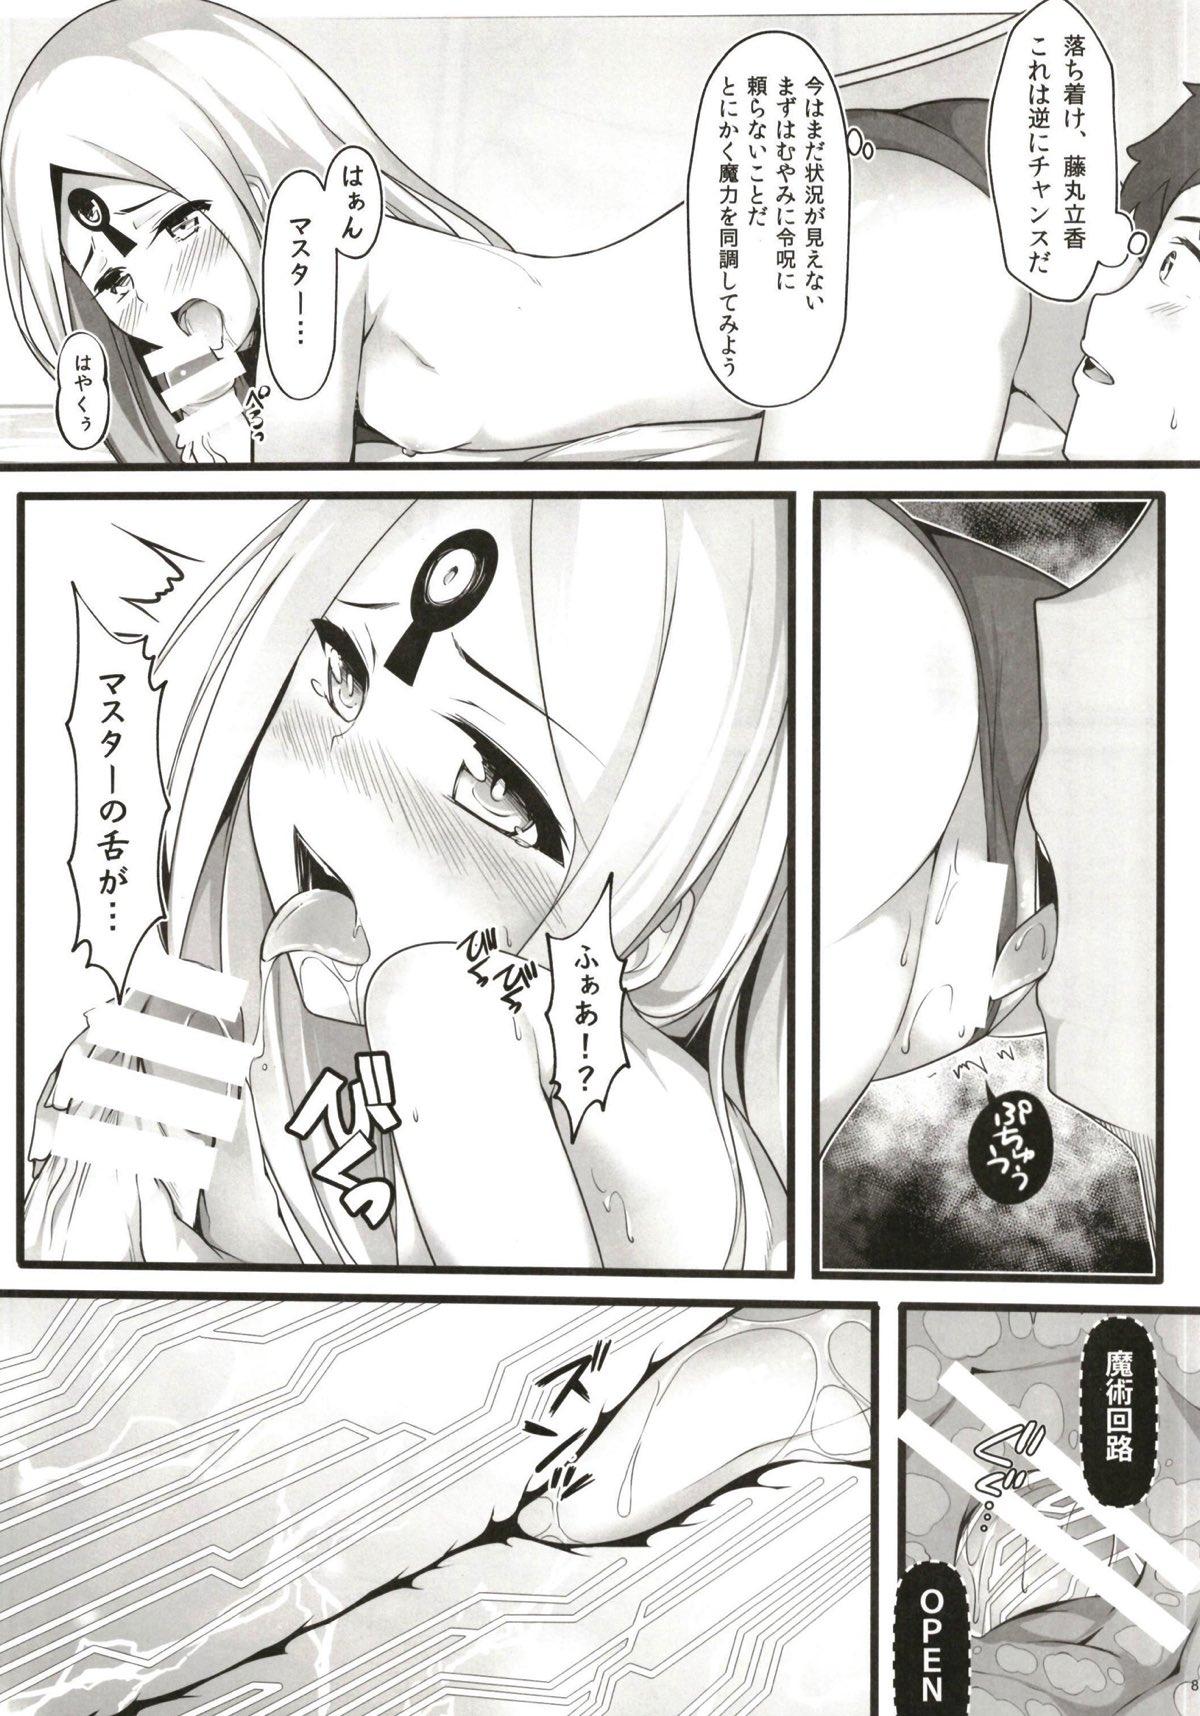 Pawg Itannaru Sex - Fate grand order Hugetits - Page 7